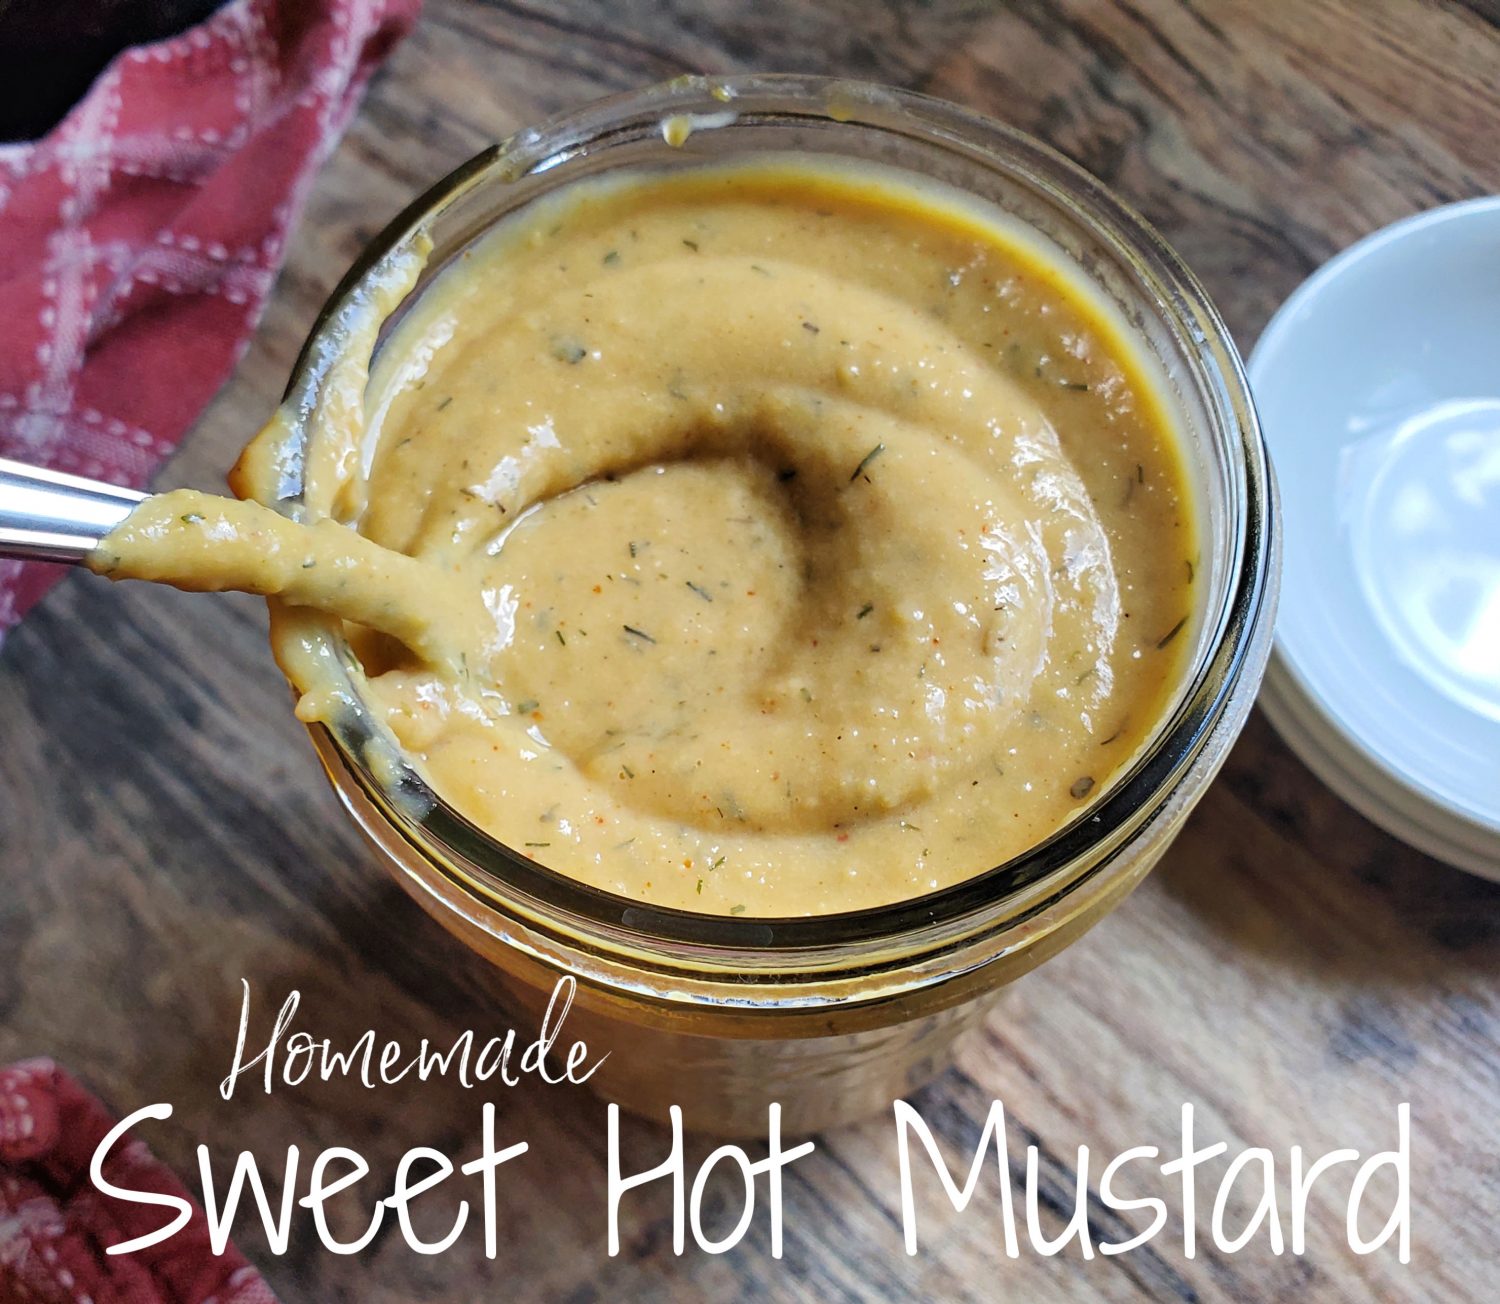 Perfectly balanced sweet hot mustard which can also be used as dipping sauce to finish off a flavor combo that only a really good sweet hot mustard can do.